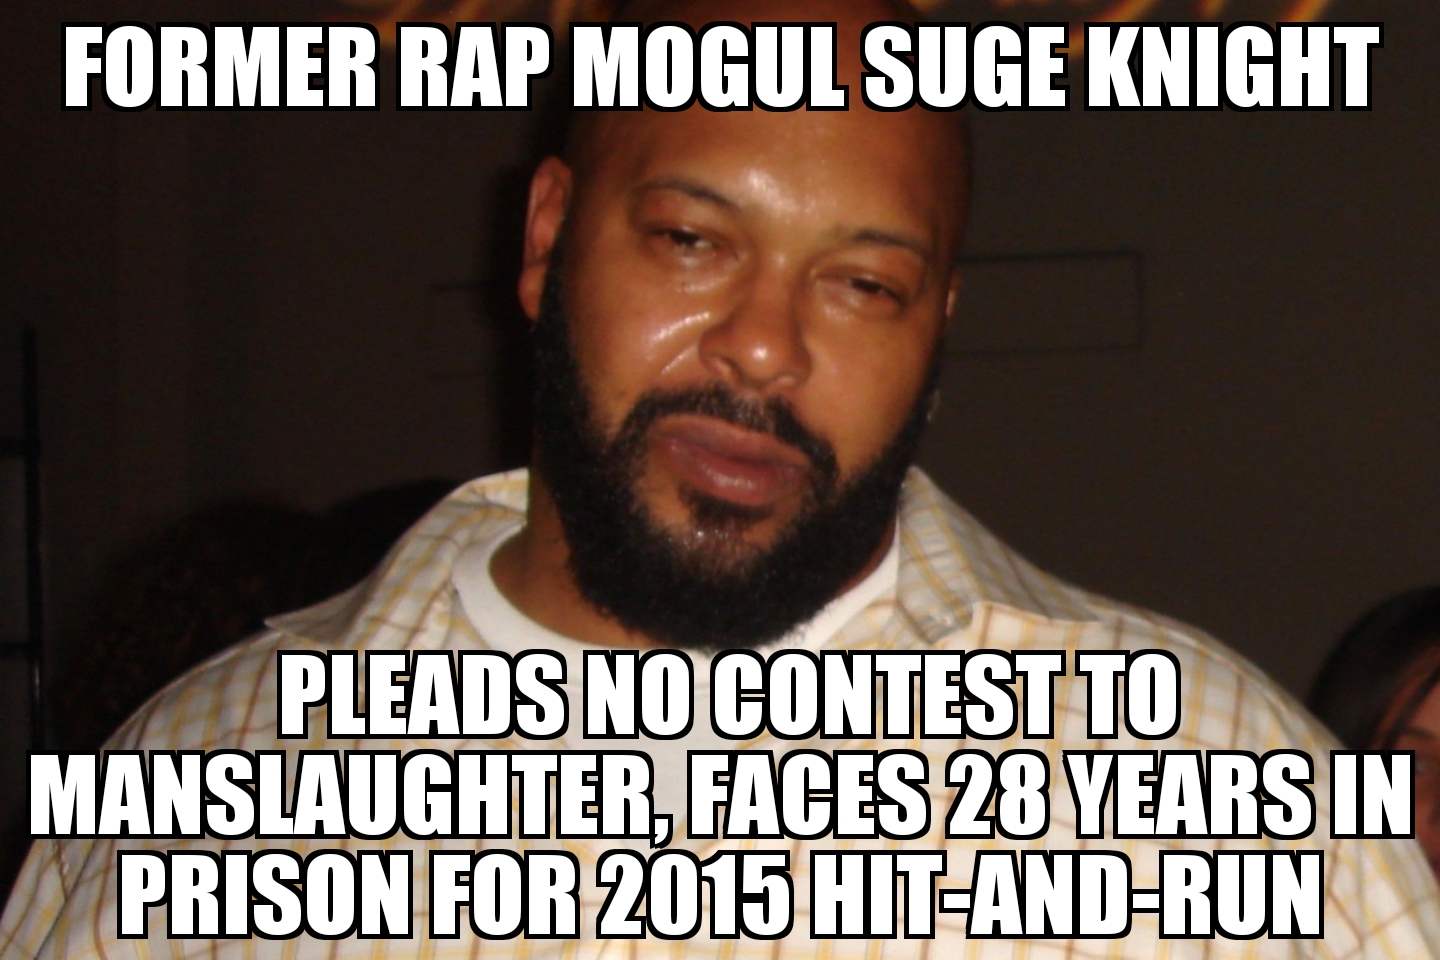 Suge Knight pleads no contest to manslaughter